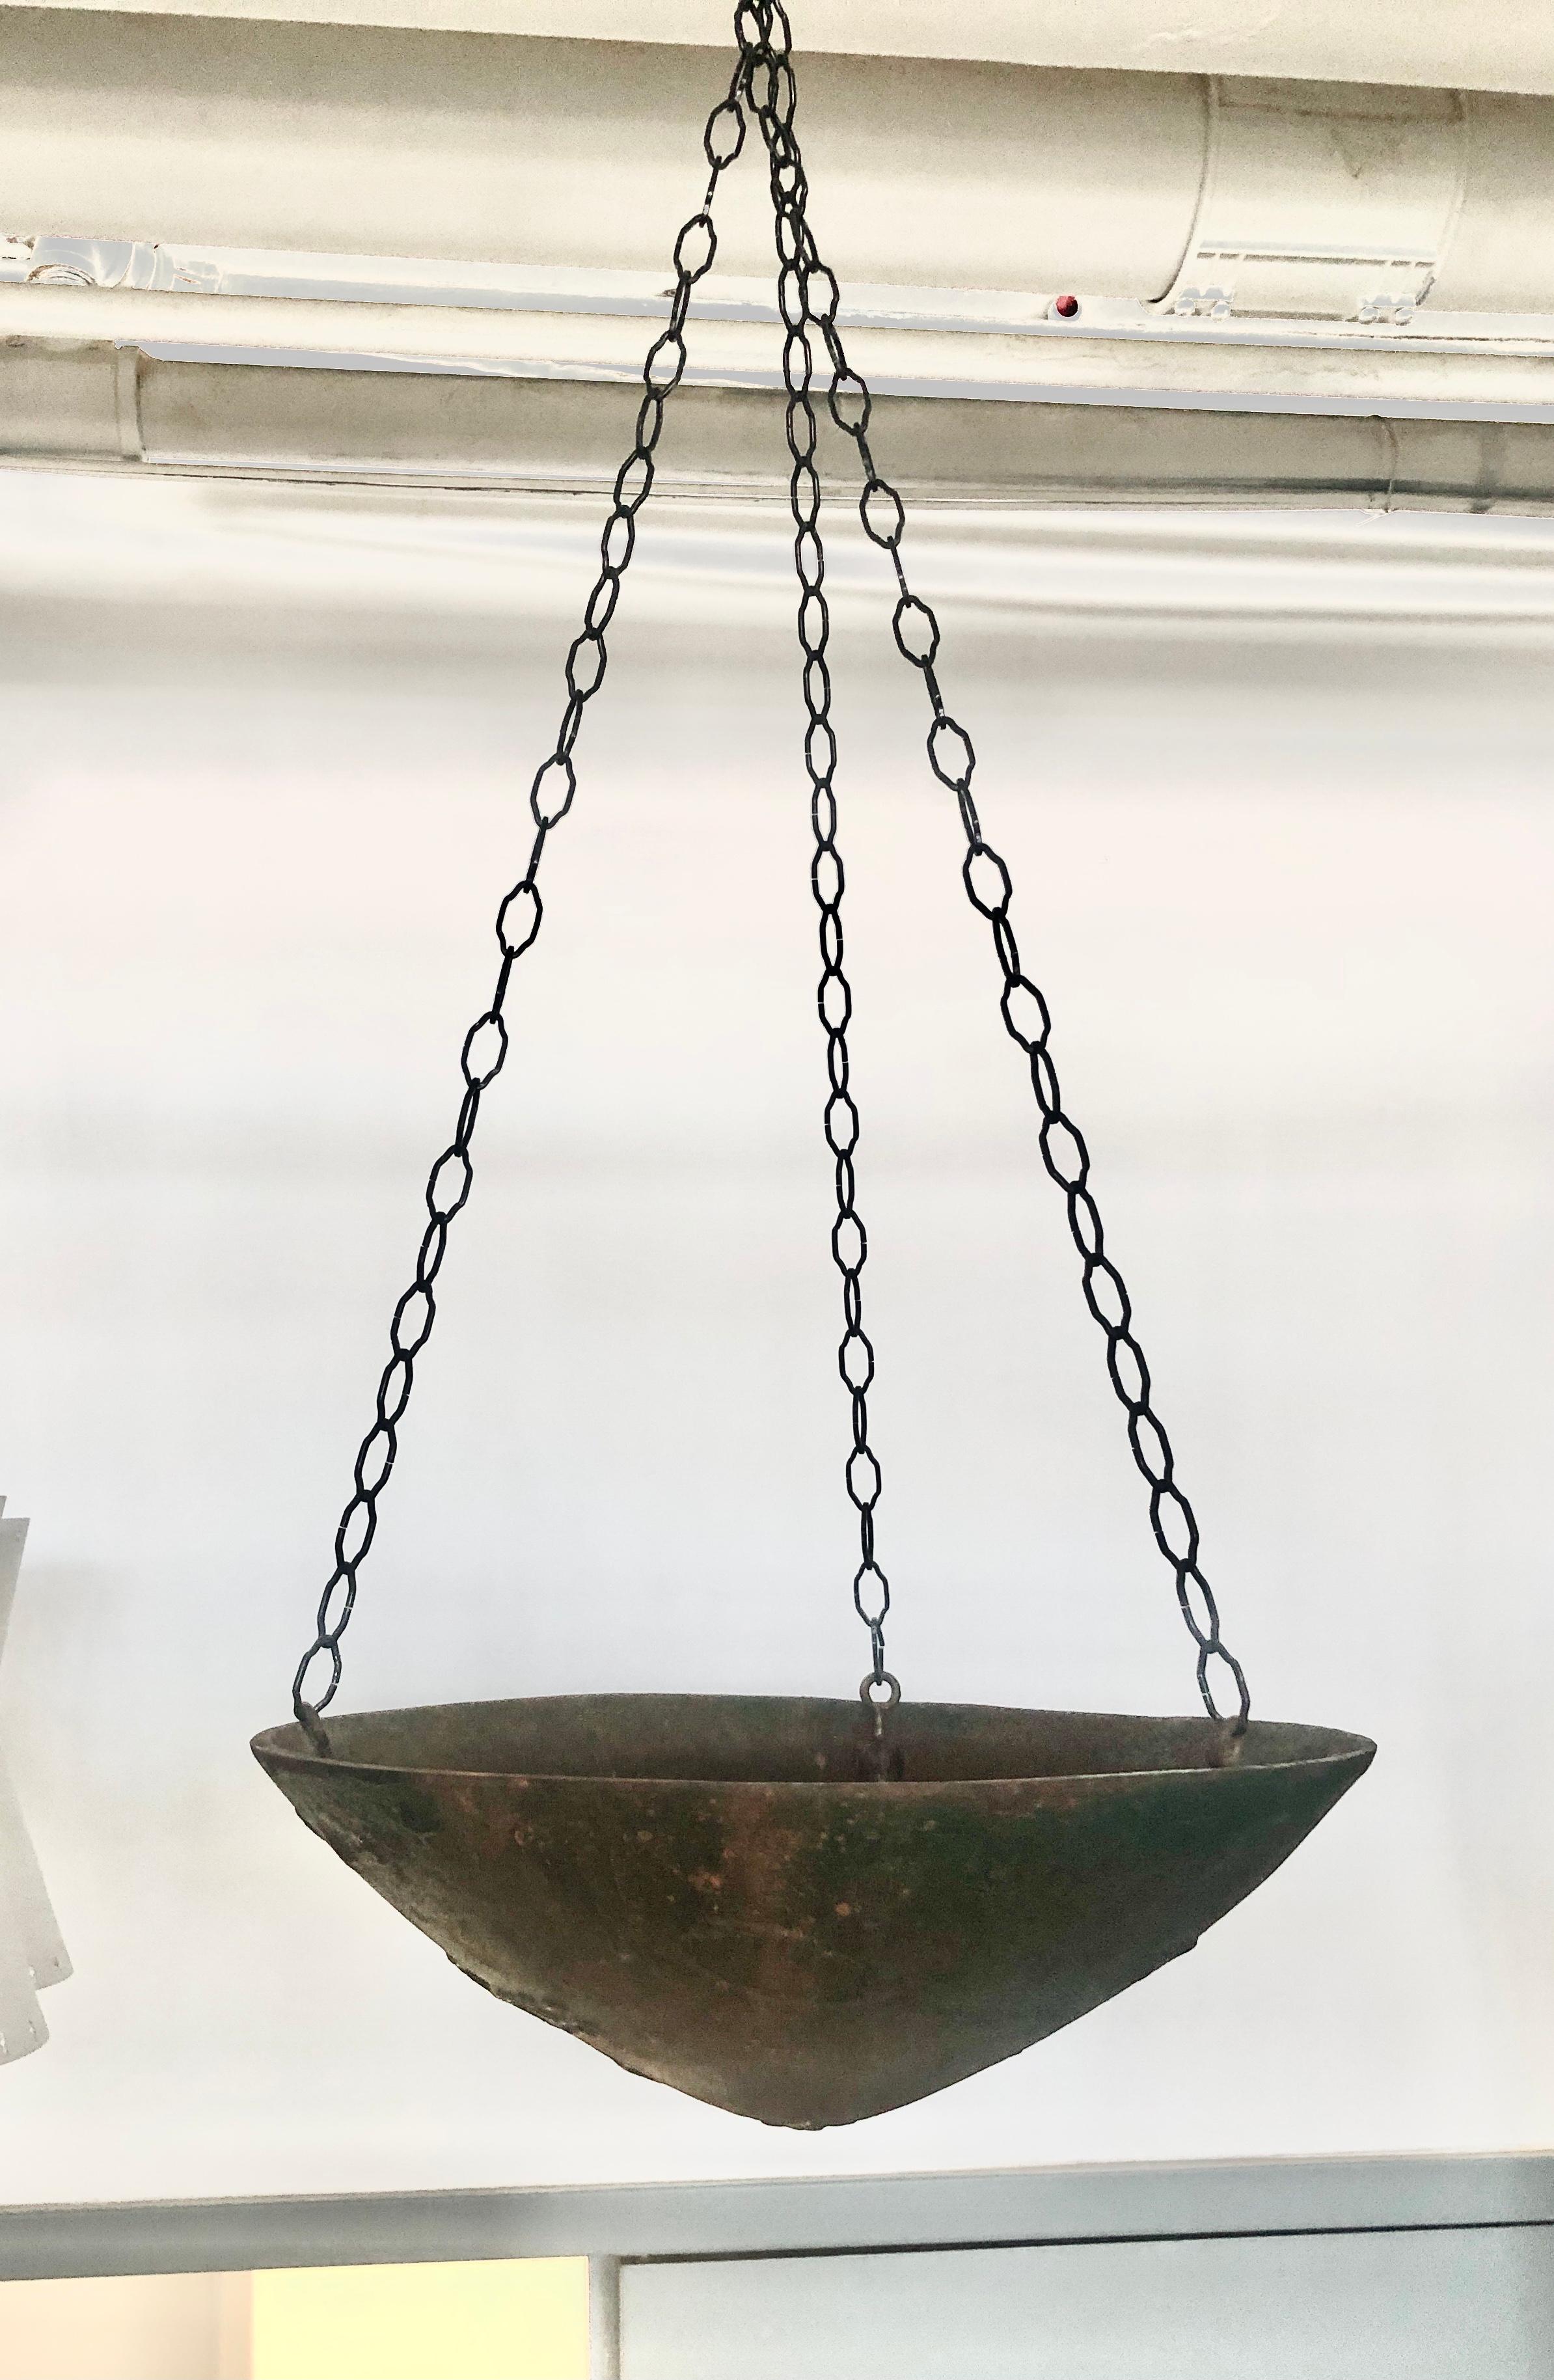 Very rare “Mikrokosmos” hanging planter designed by Olof Hult (1892-1962) for Nafveqvarns Bruk, Sweden, designed 1922, executed 1920s-1930s. Height 5